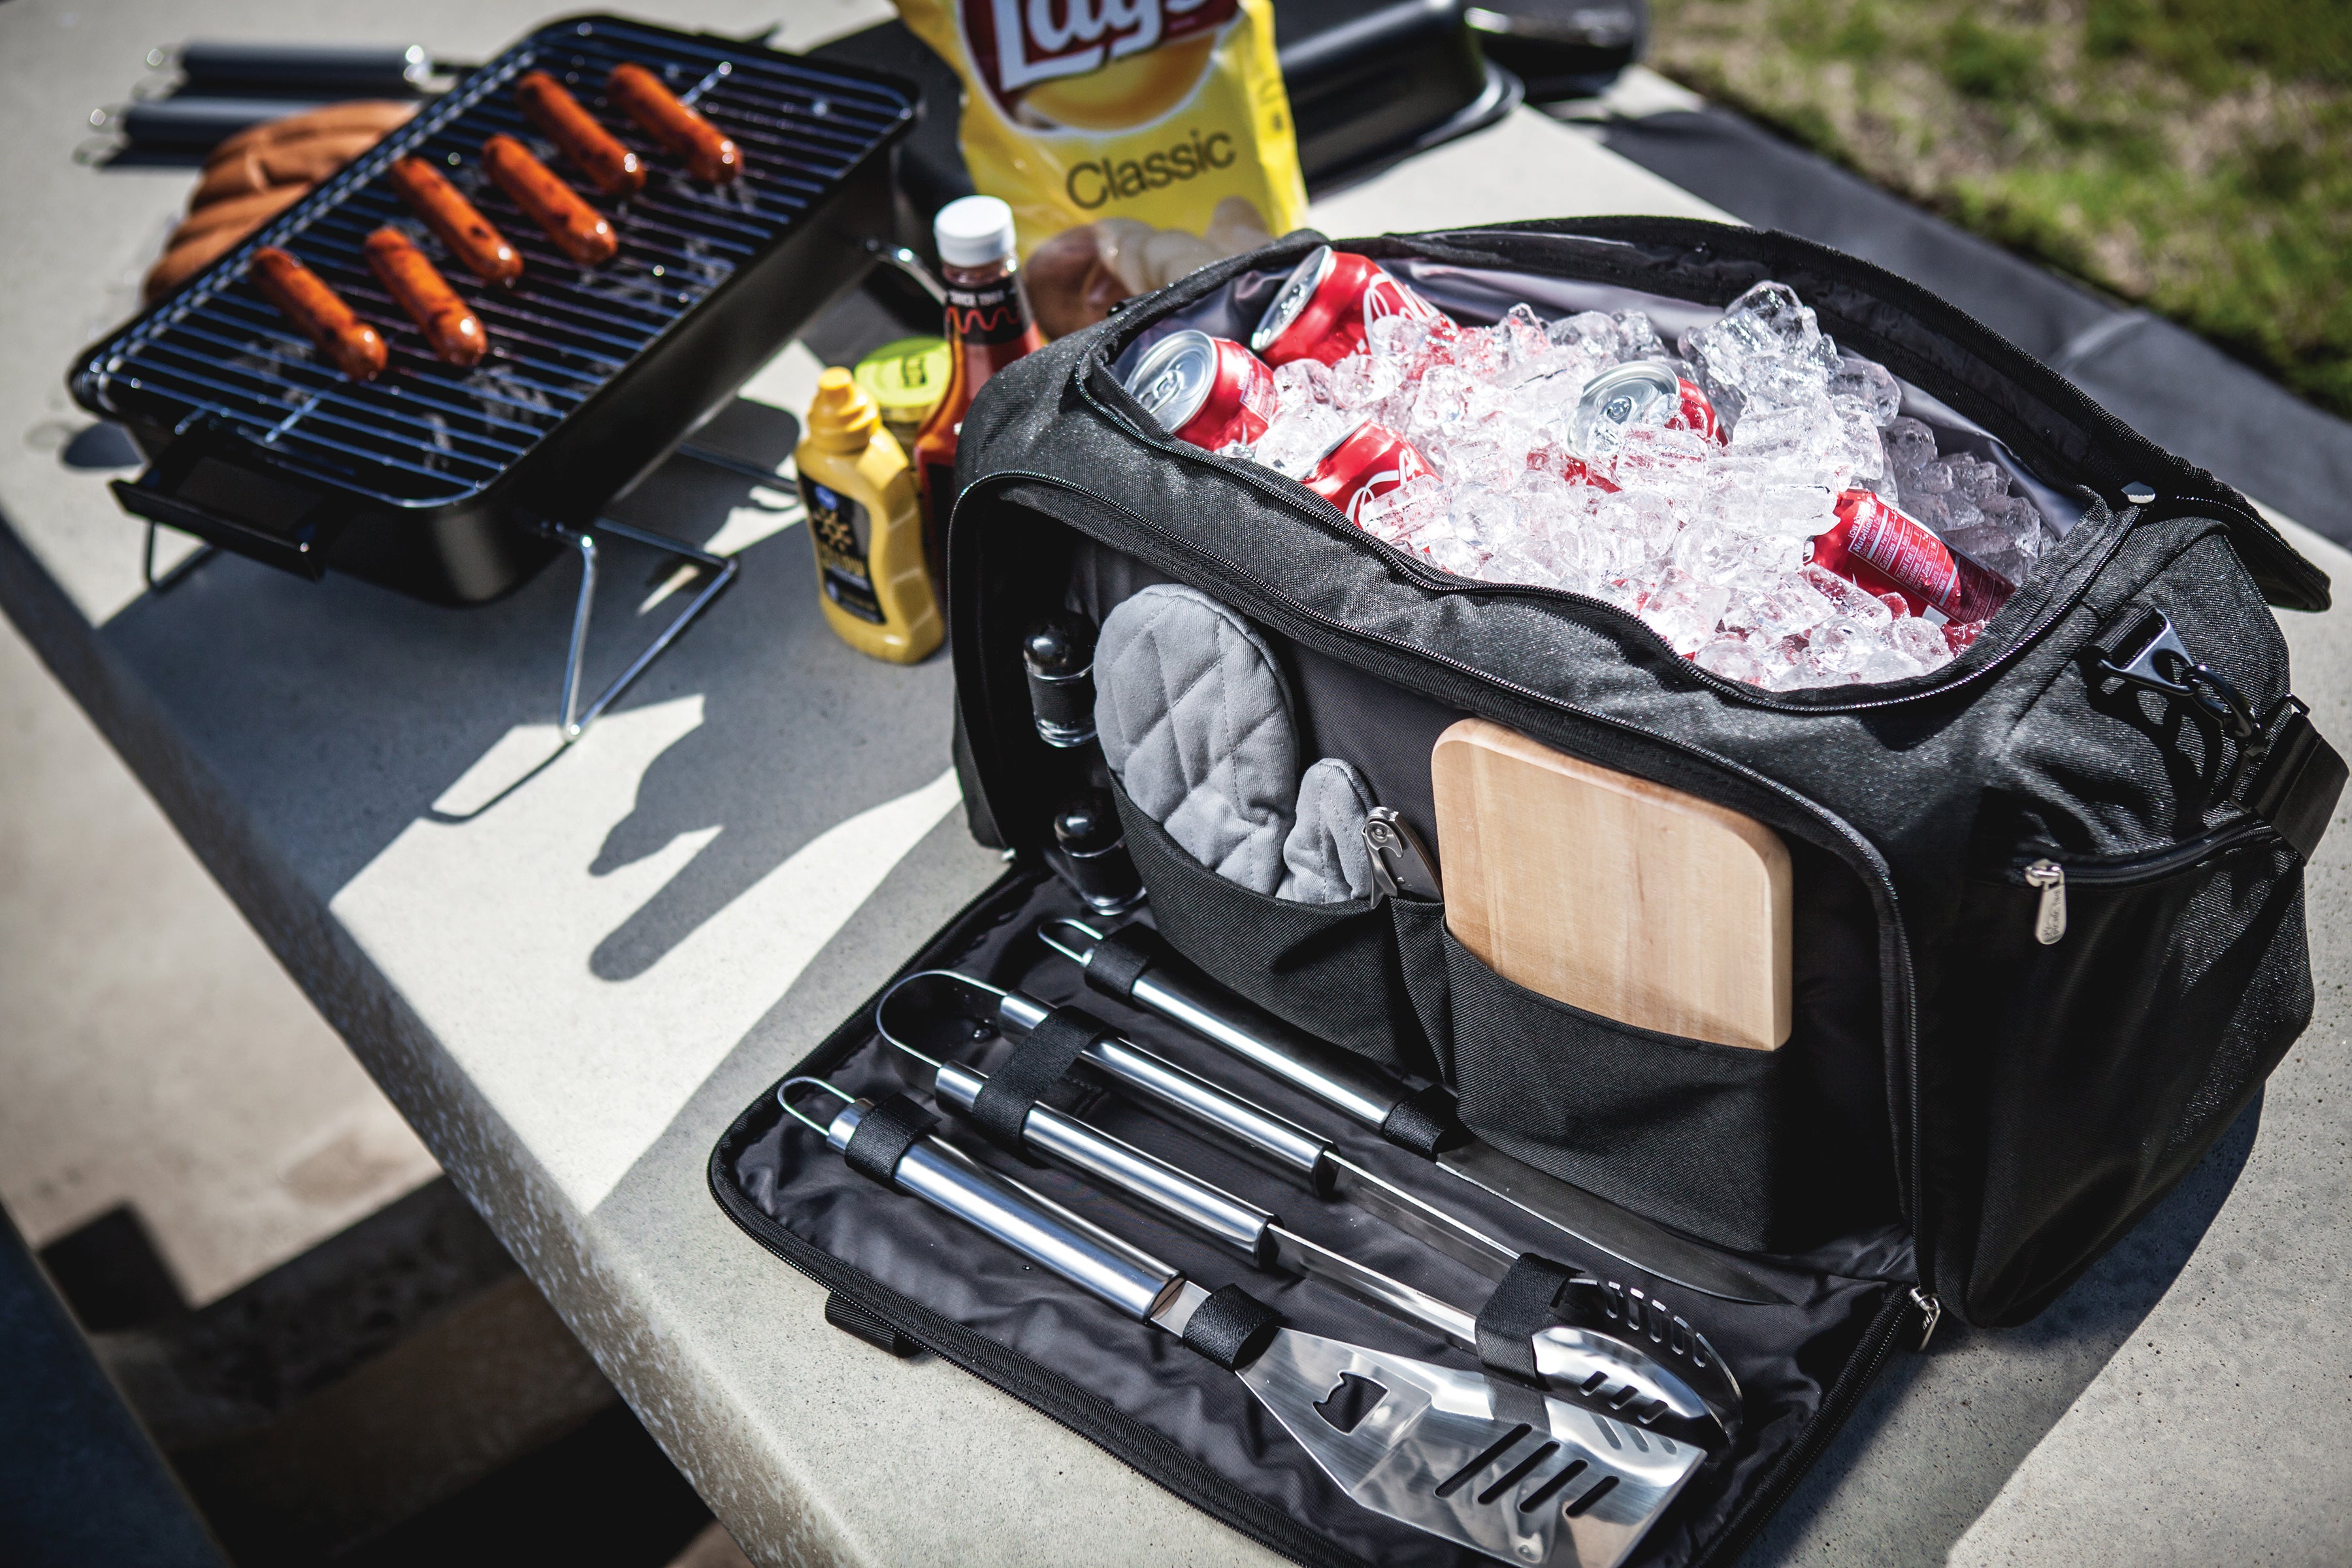 West Virginia Mountaineers - BBQ Kit Grill Set & Cooler